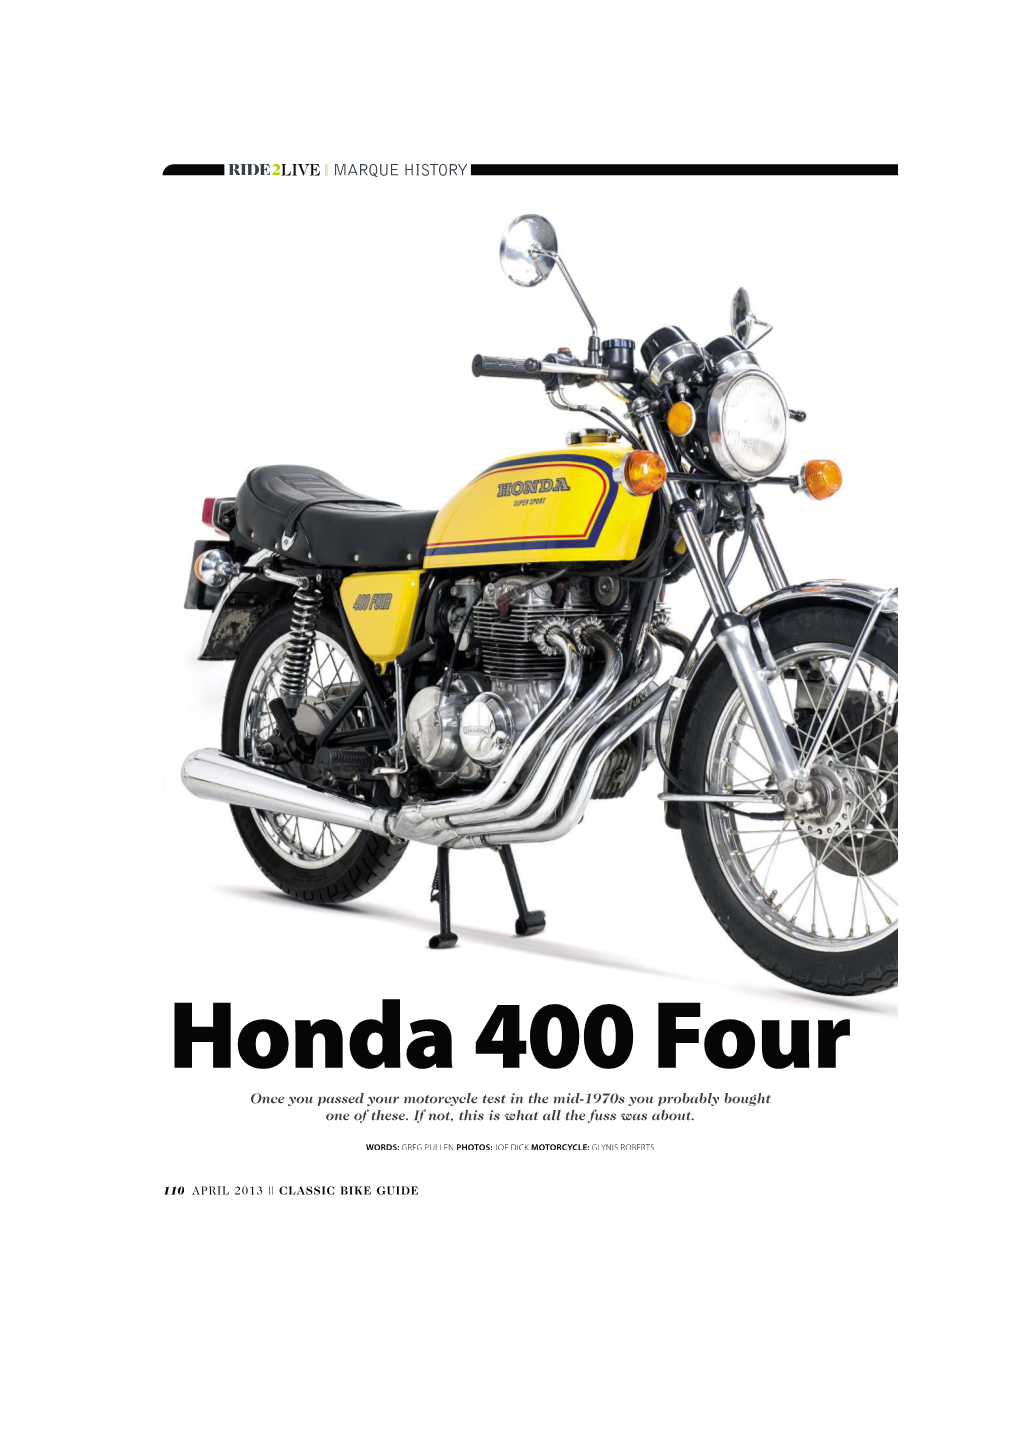 Honda 400 Four Once You Passed Your Motorcycle Test in the Mid-1970S You Probably Bought One of These